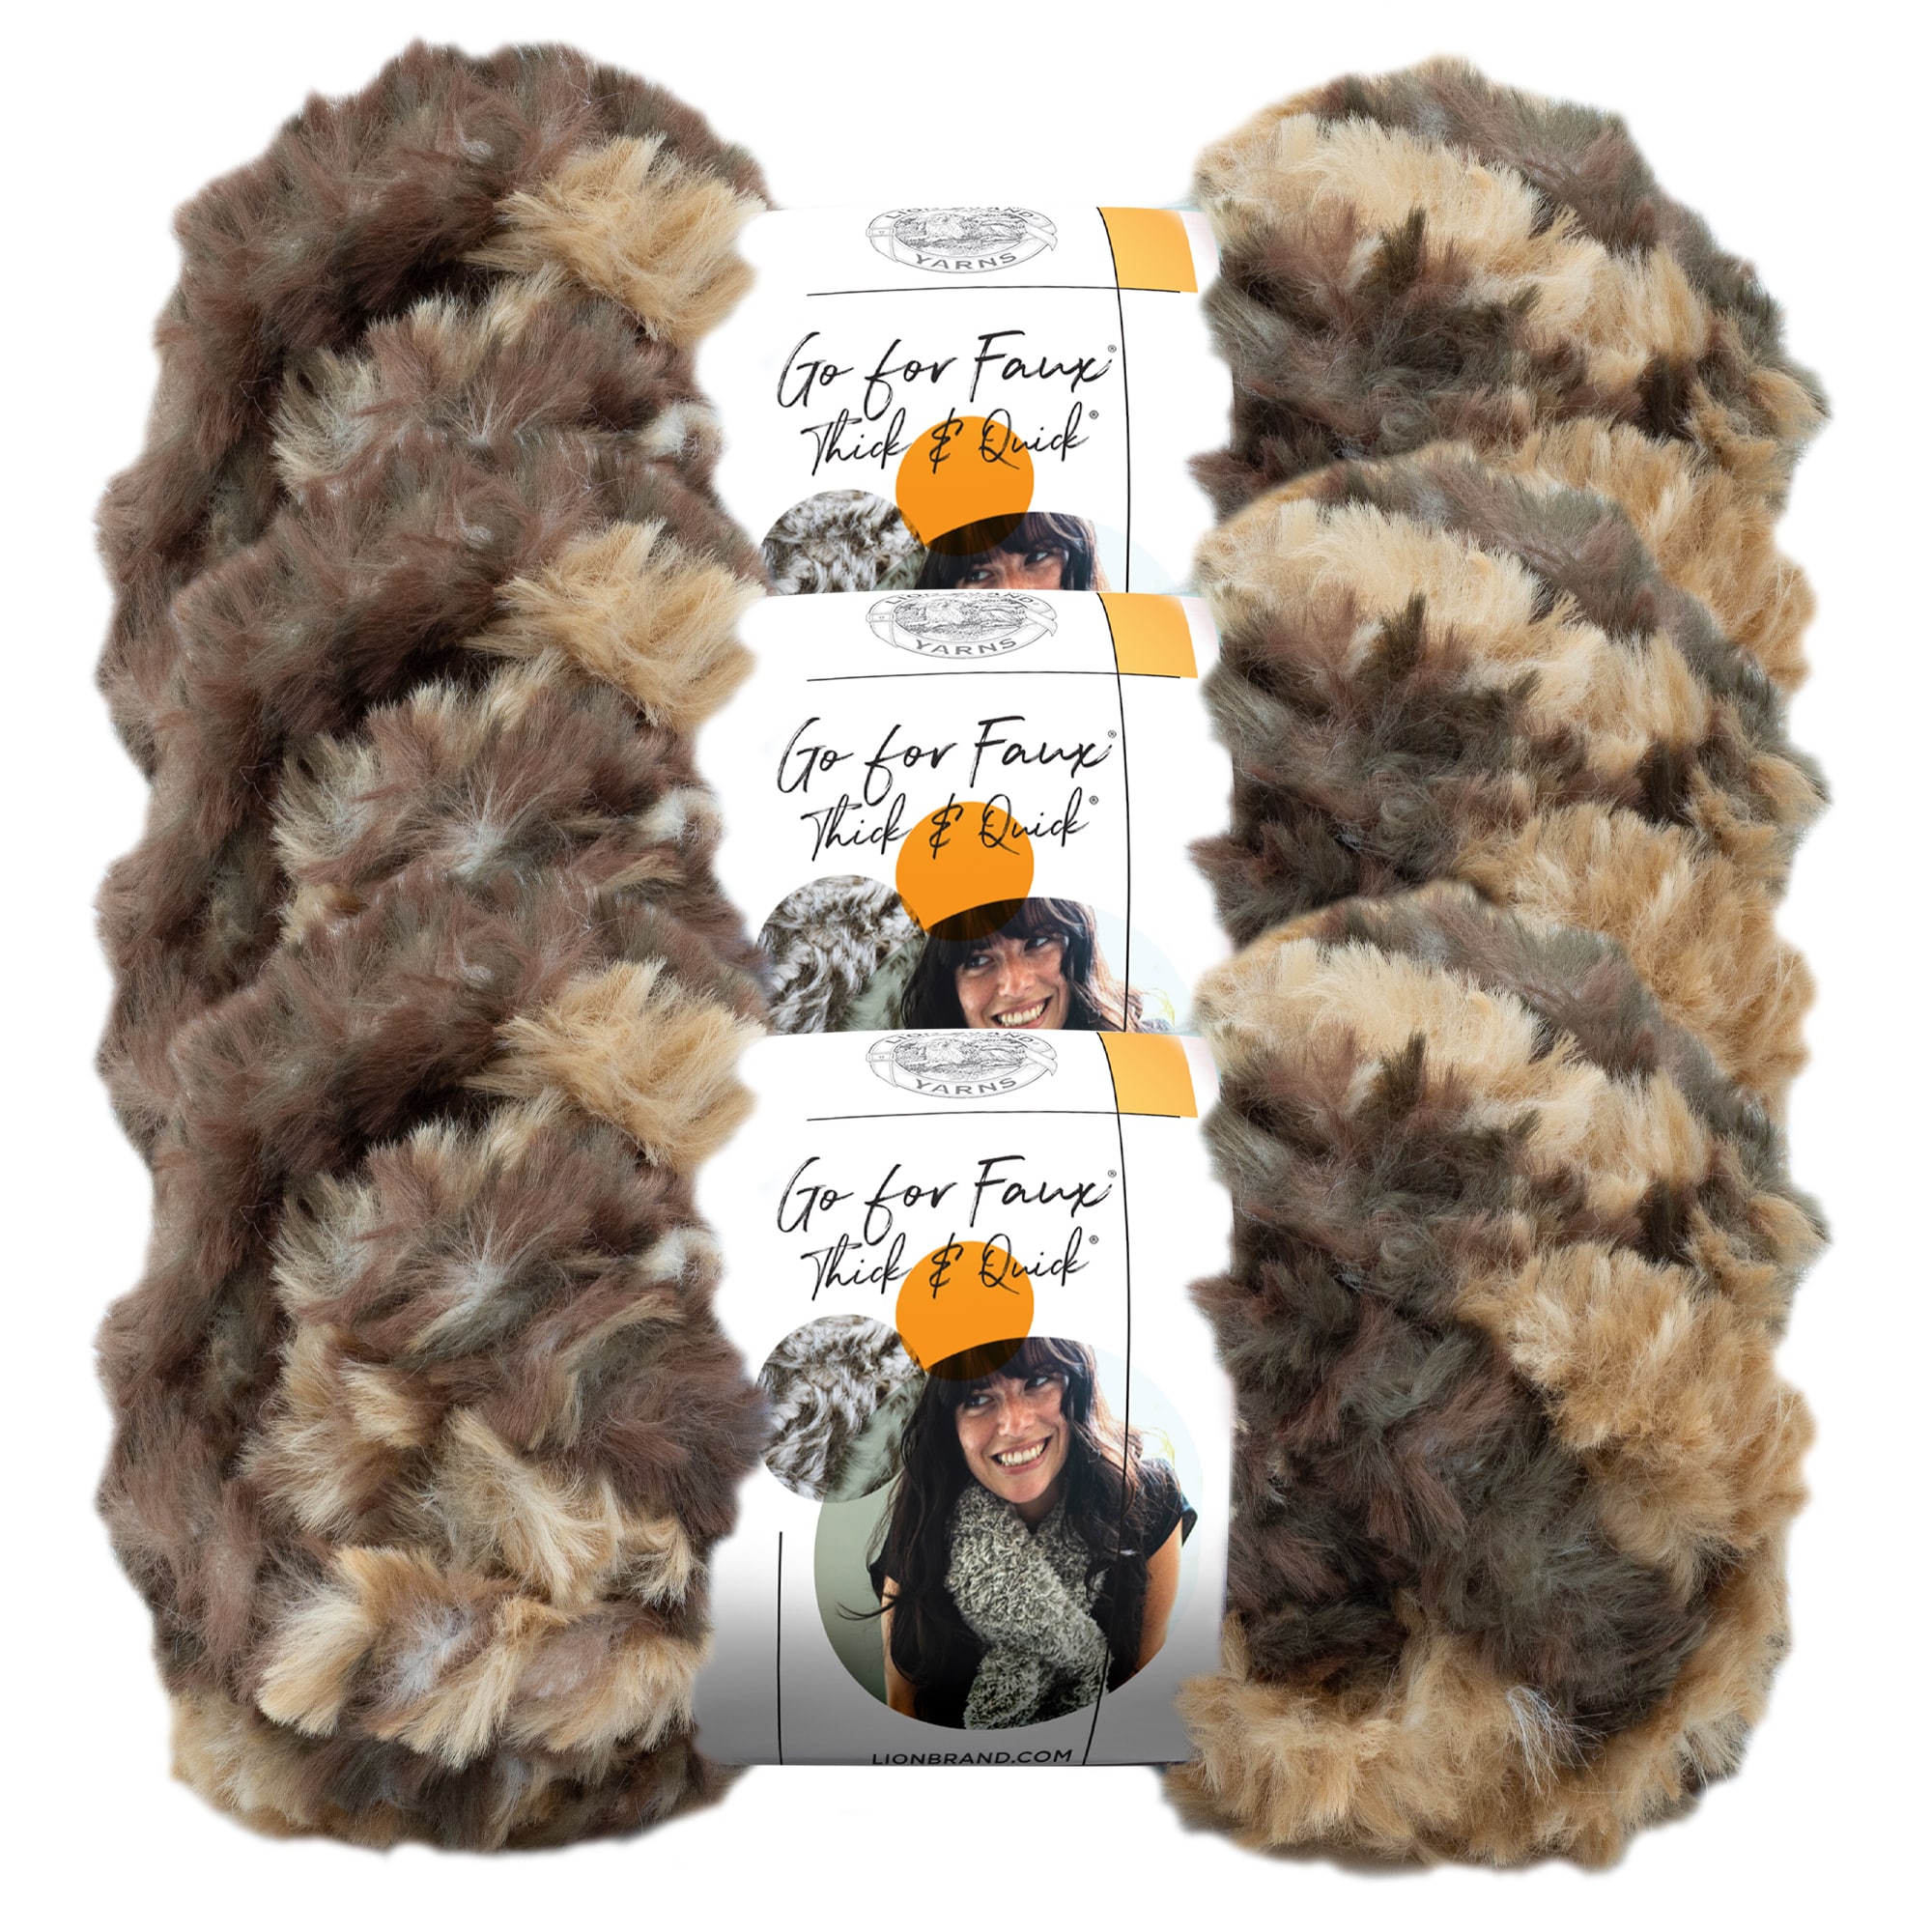  Lion Brand Yarn (1 Skein) Go for Faux Thick & Quick